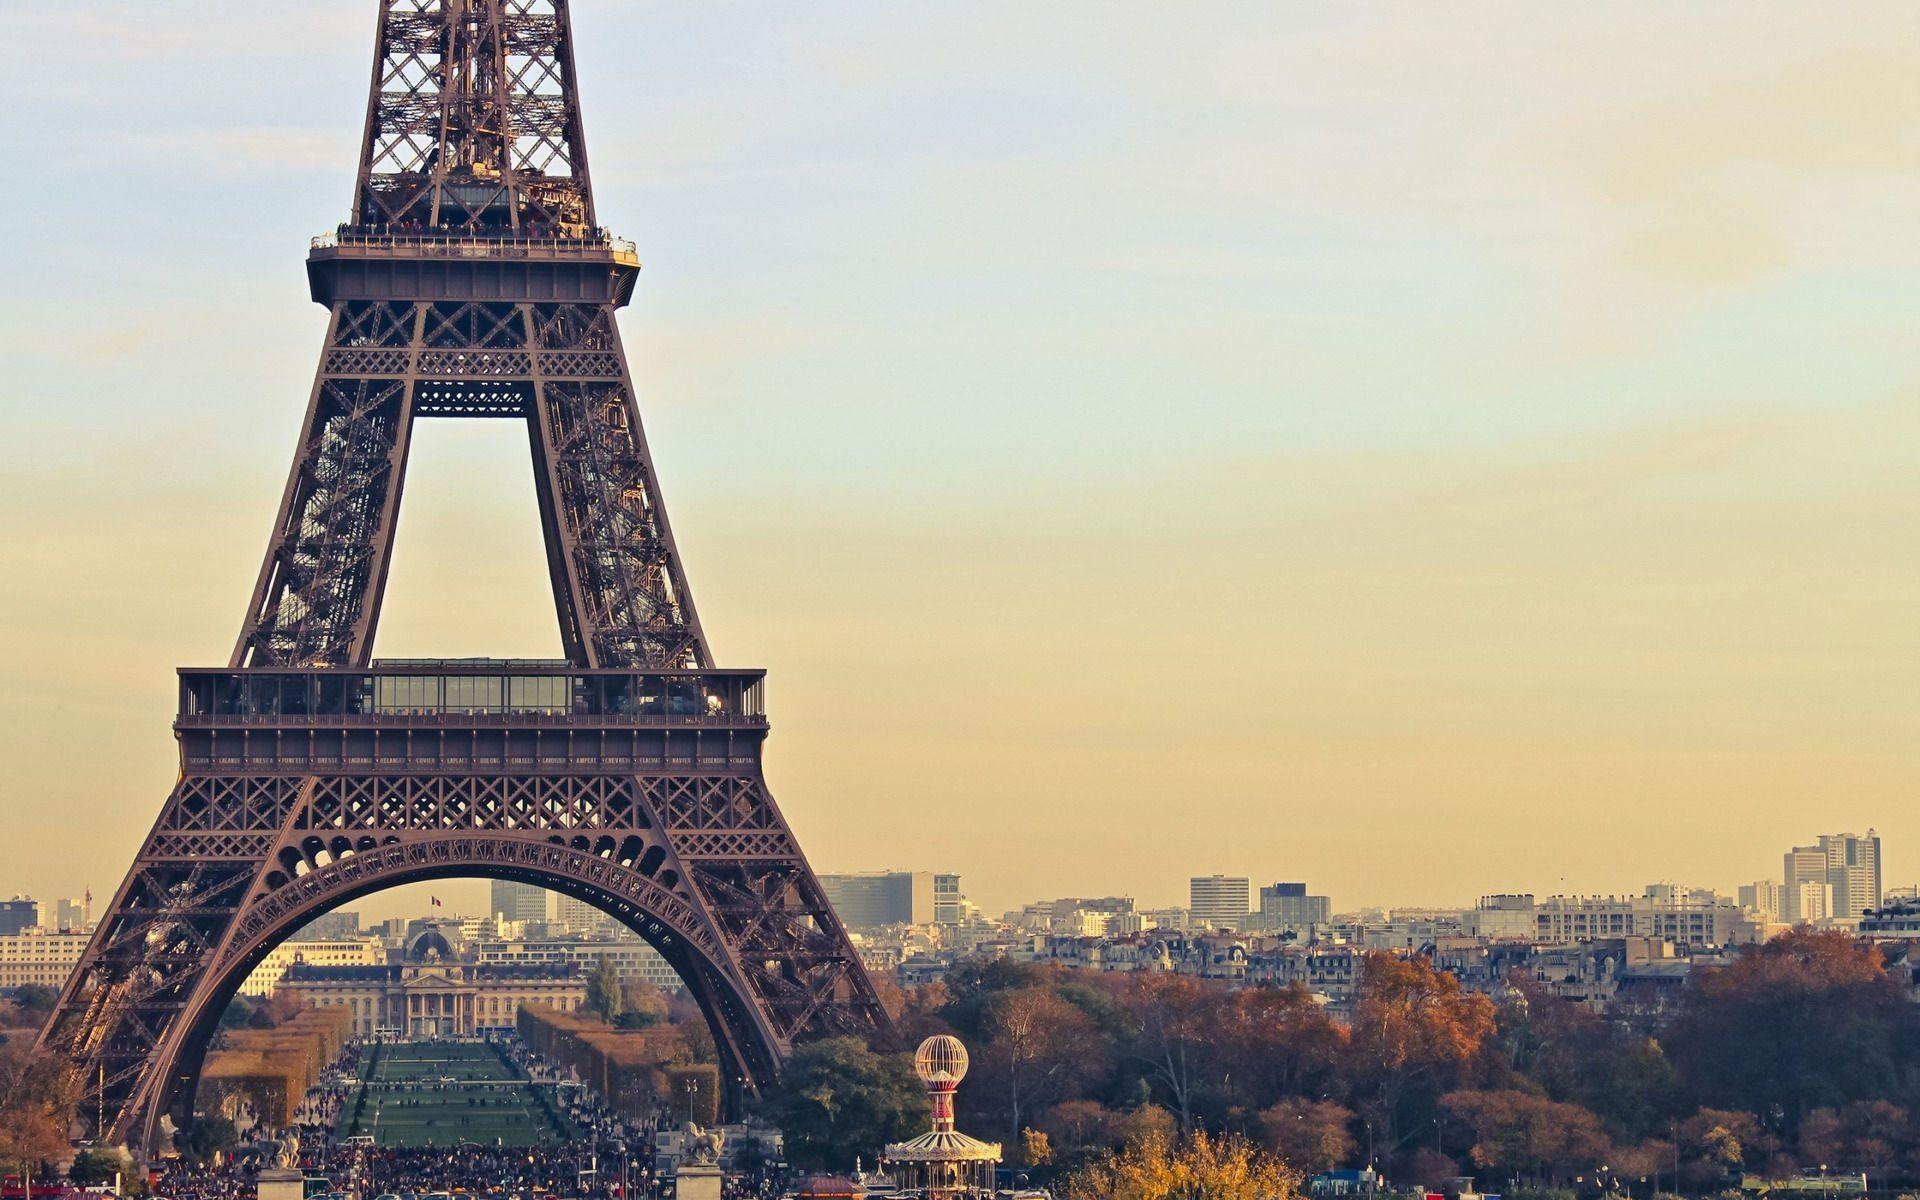 Paris France Eiffel Tower Travel photo and wallpaper